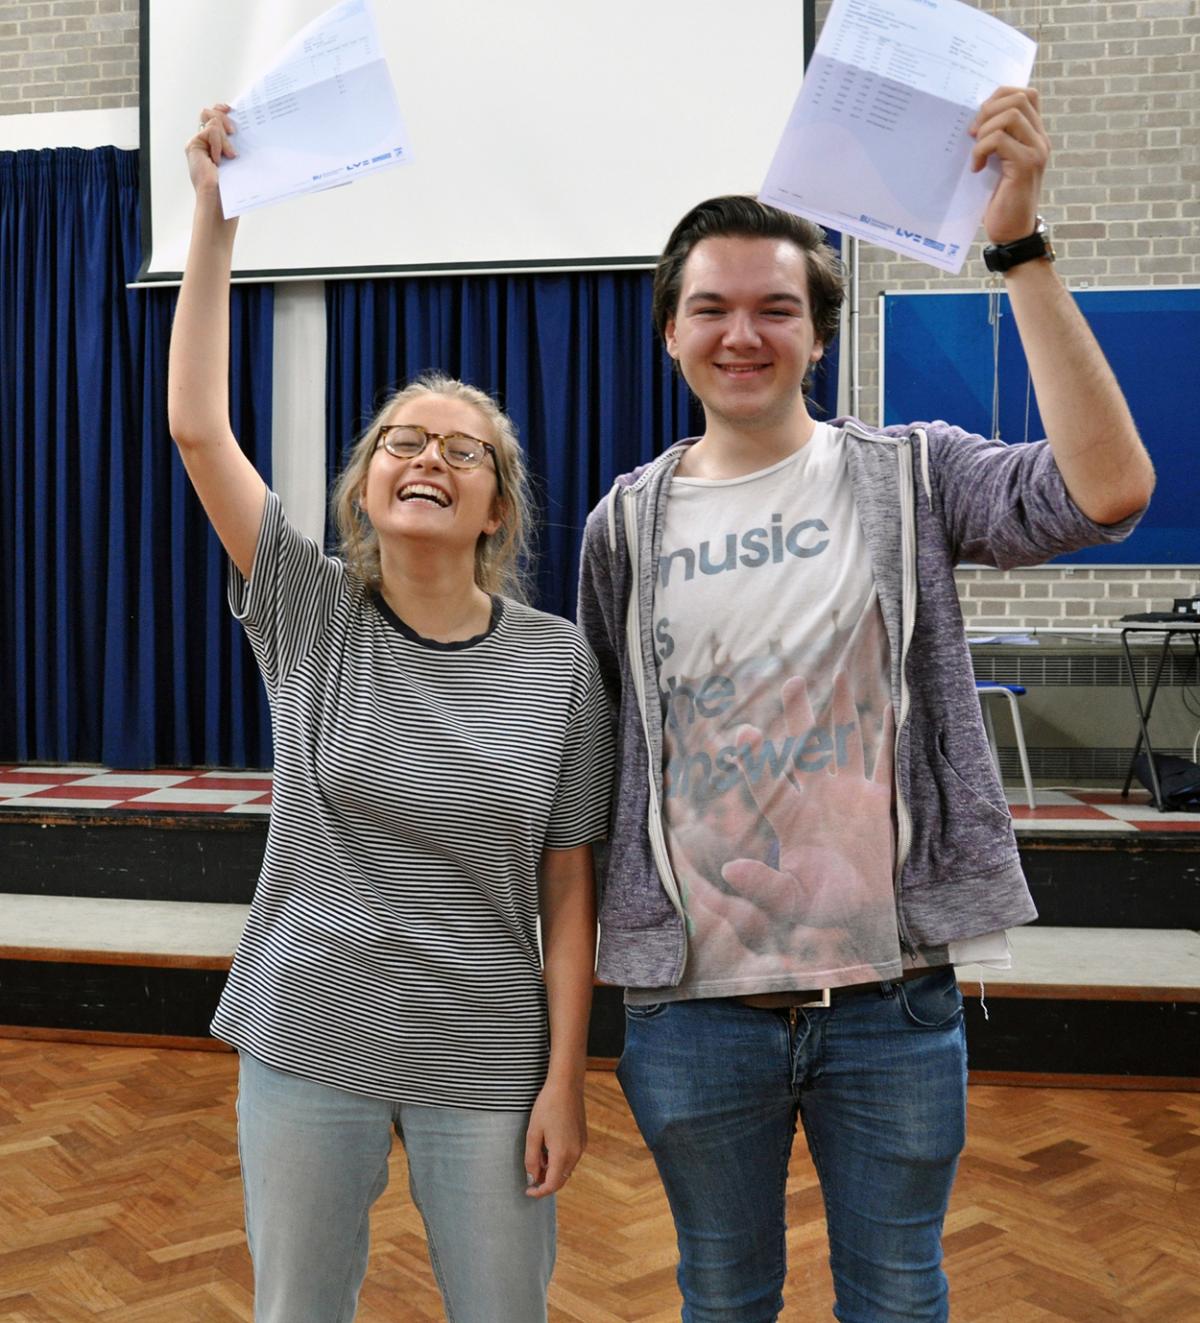 A Level results day at Avonbourne School 